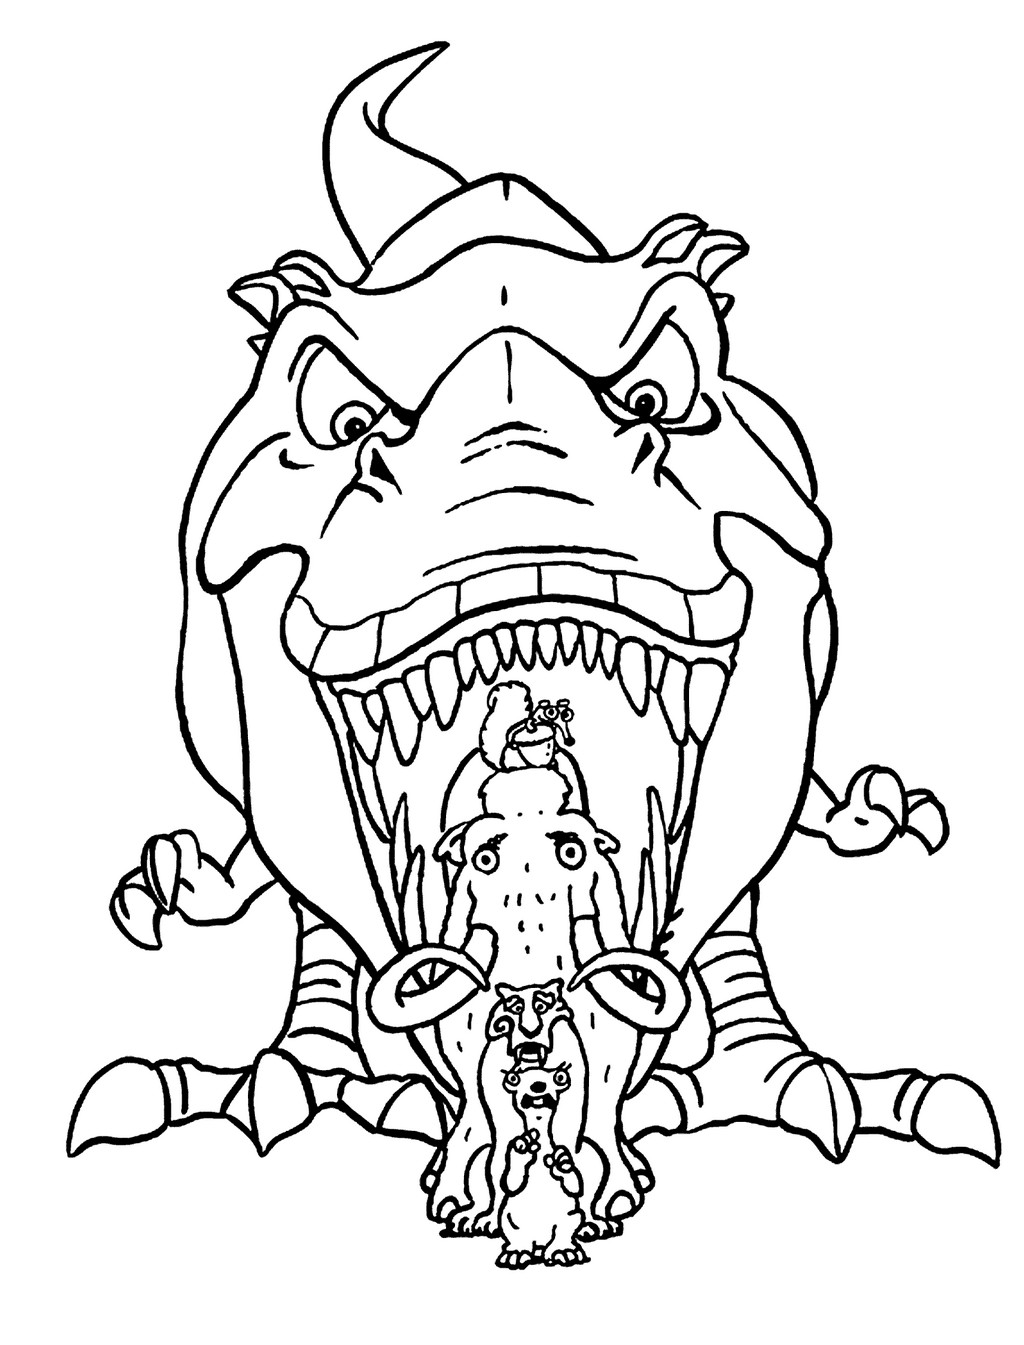 gertie dino from ice age coloring page